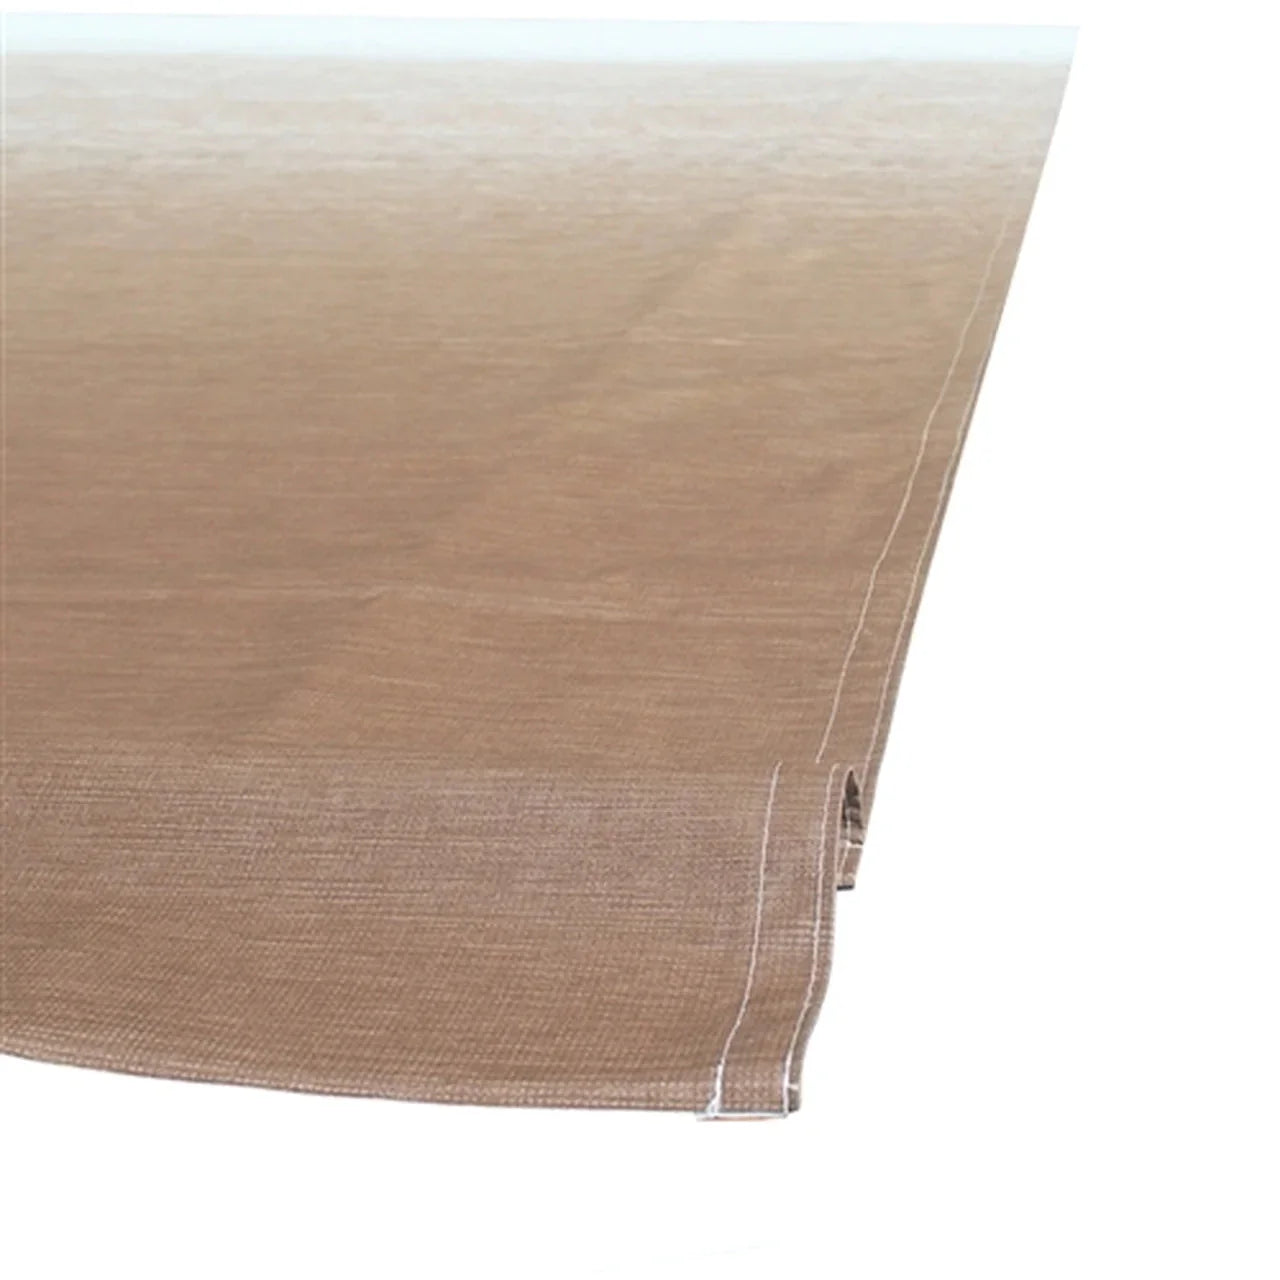 Aleko RV Awning Fabric Replacement - 13 X 8 ft (4 x 2.4 m) -